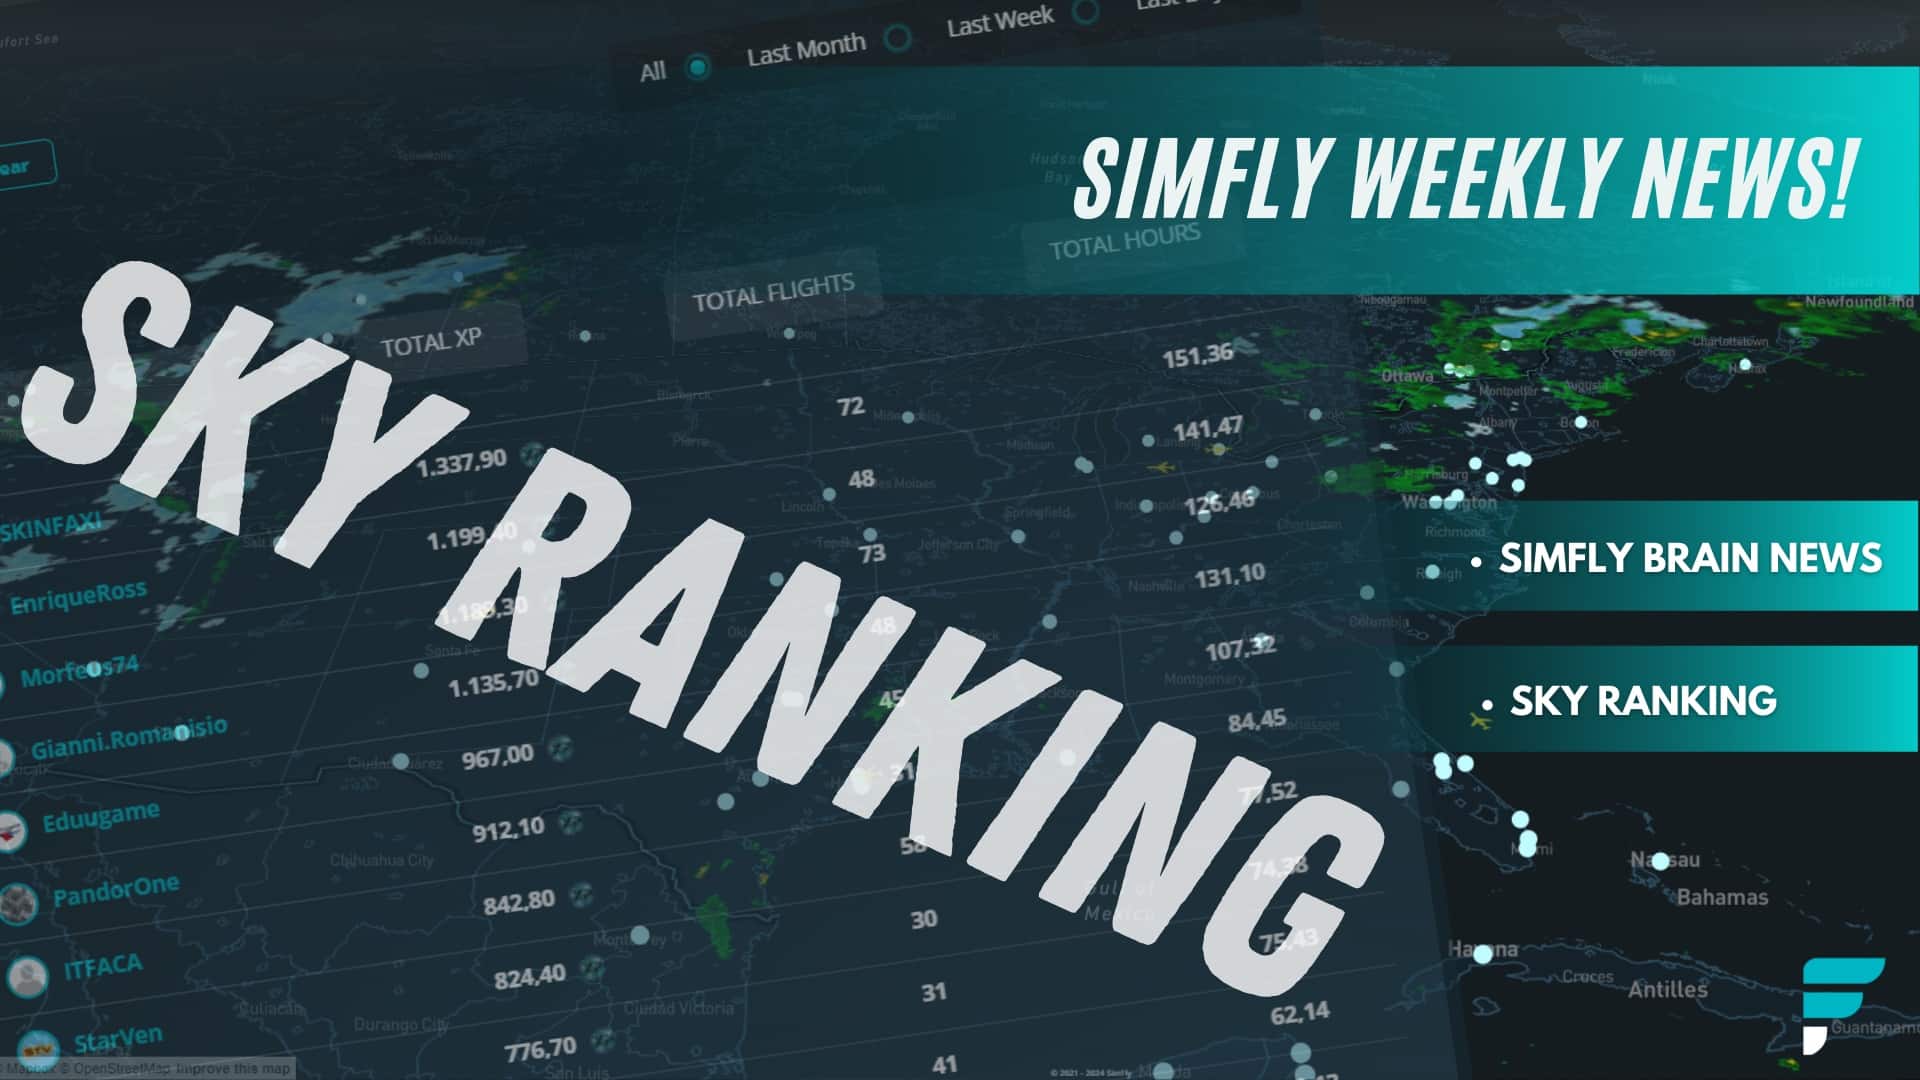 Updates and Sky Ranking